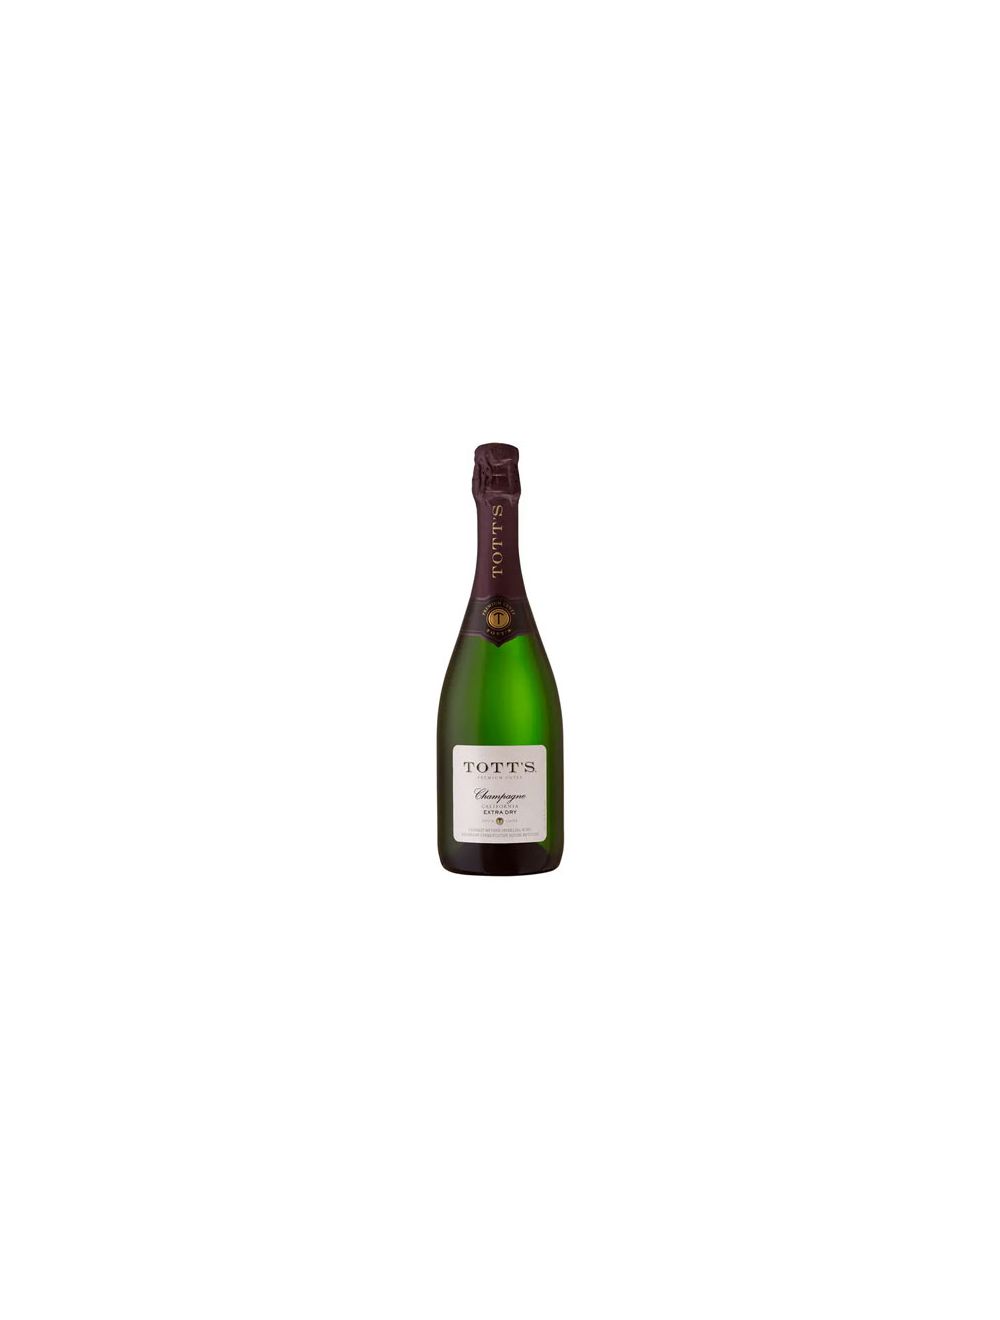 TOTT'S EXTRA DRY CALIFORNIA CHAMPAGNE 750mL